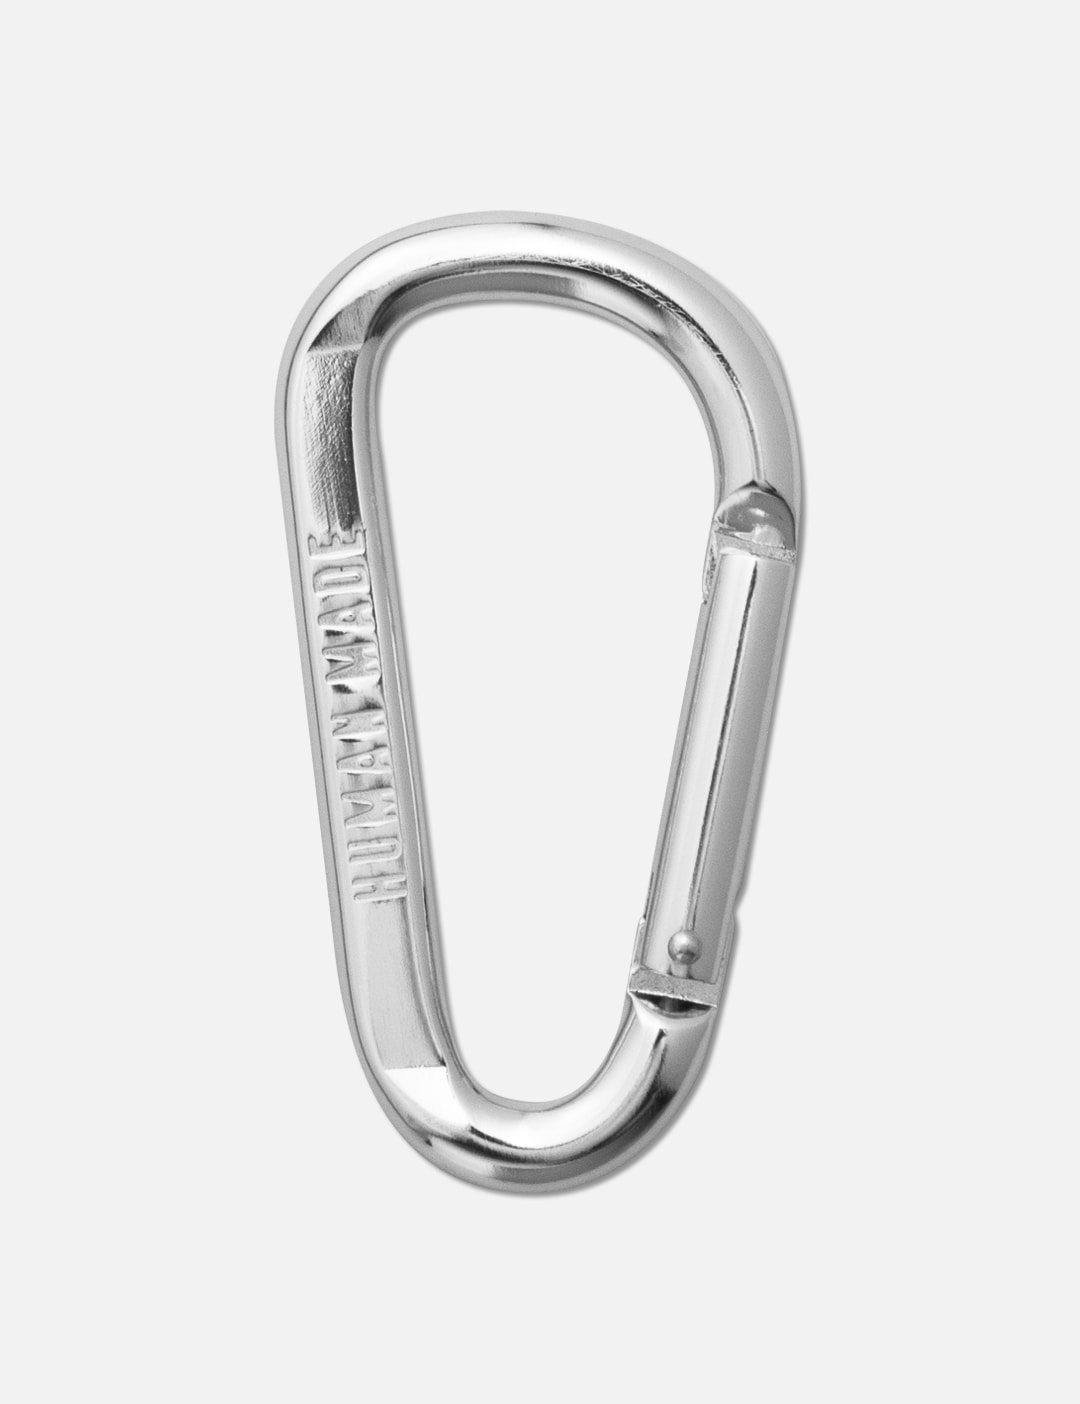 Human Made - HEART KEYRING  HBX - Globally Curated Fashion and Lifestyle  by Hypebeast